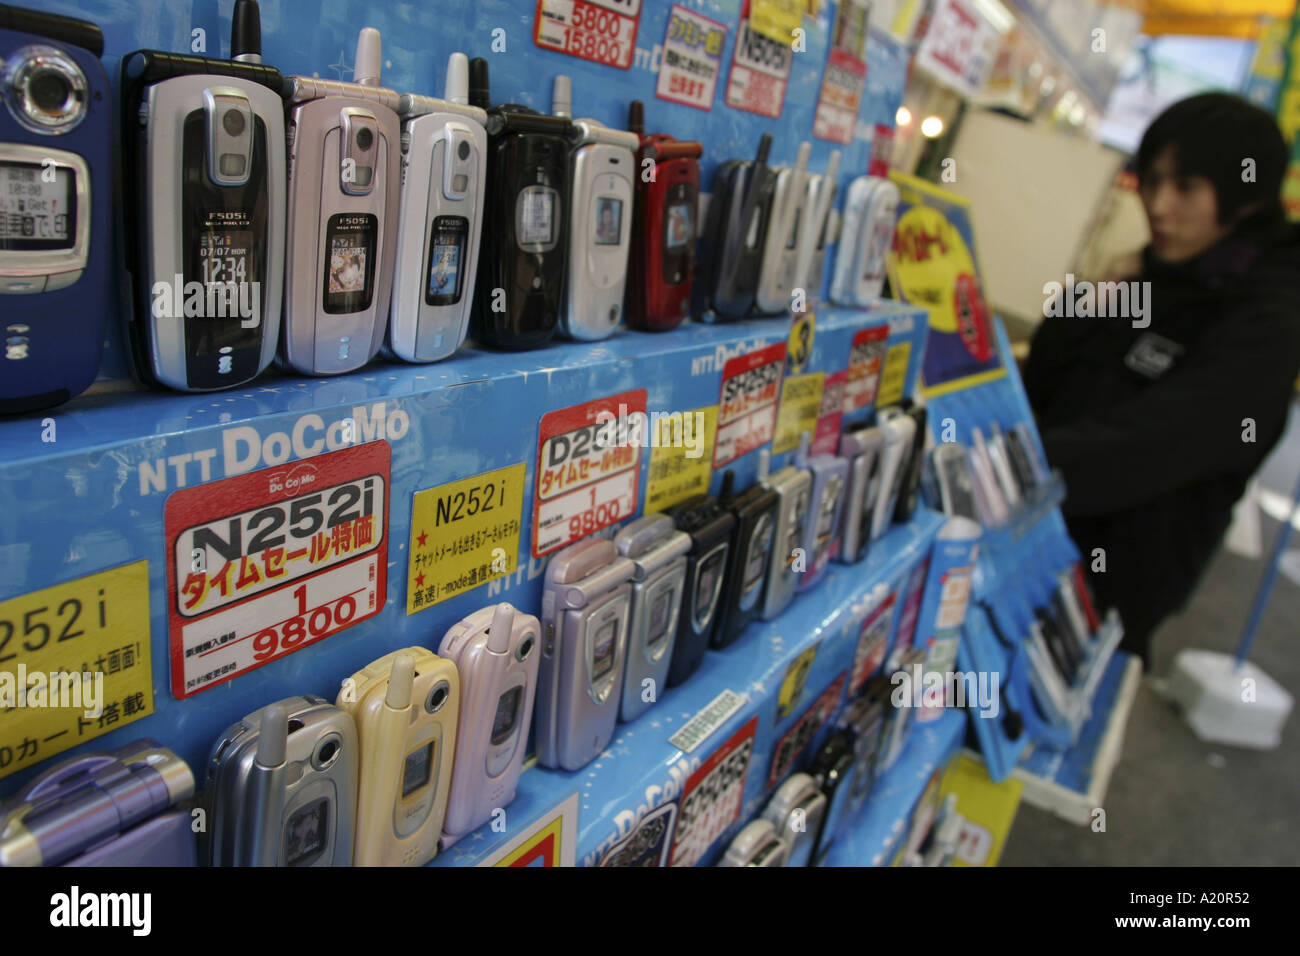 Teenager behind rows of mobile phones for sale on a NTT DoCoMo stand in an electronics store, Tokyo, Japan Stock Photo